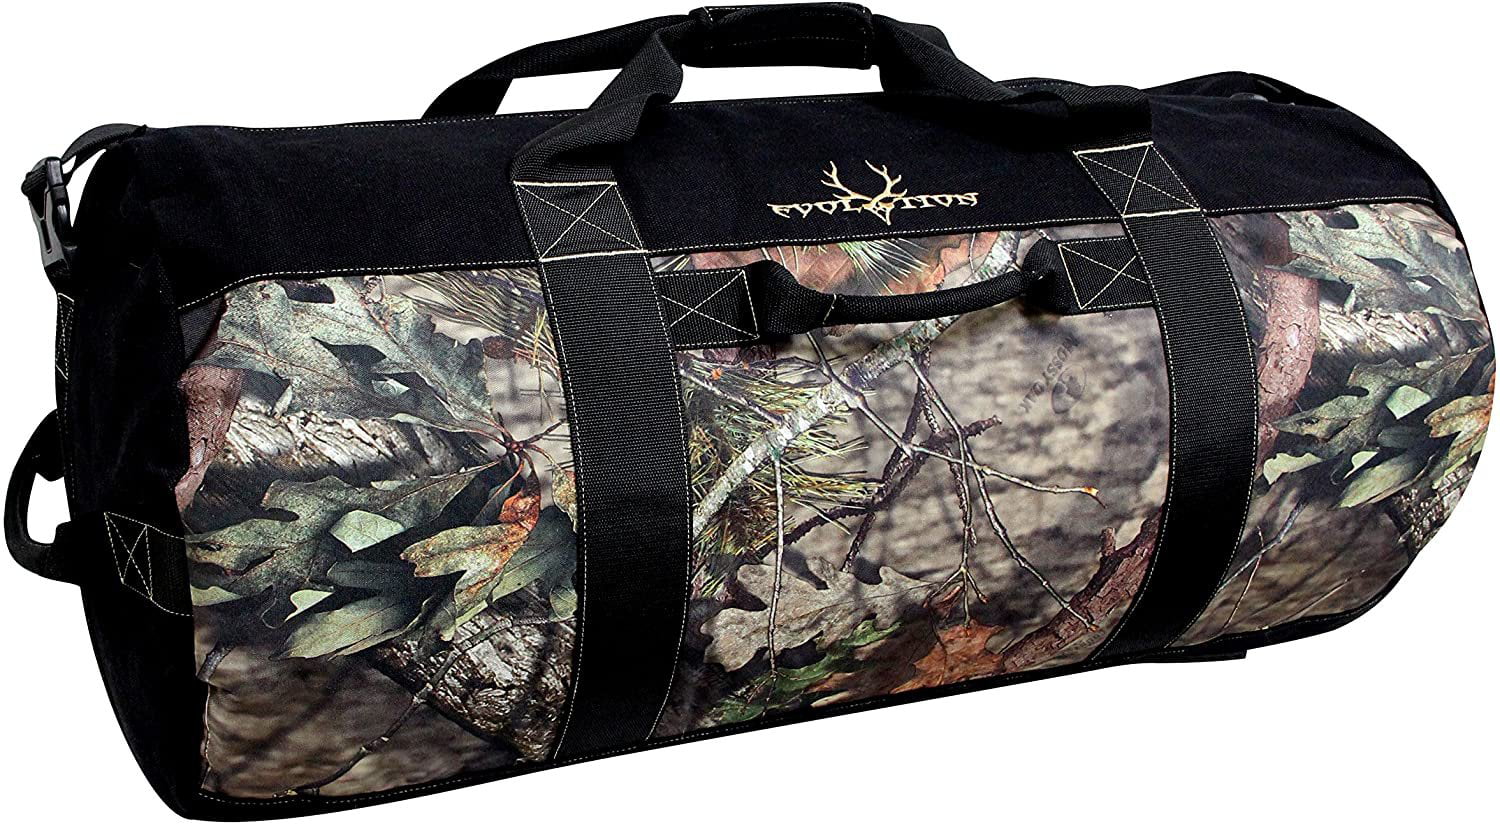 Evolve Gym Bag Duffle Bag with waterproof side pouch and shoe compartment. 